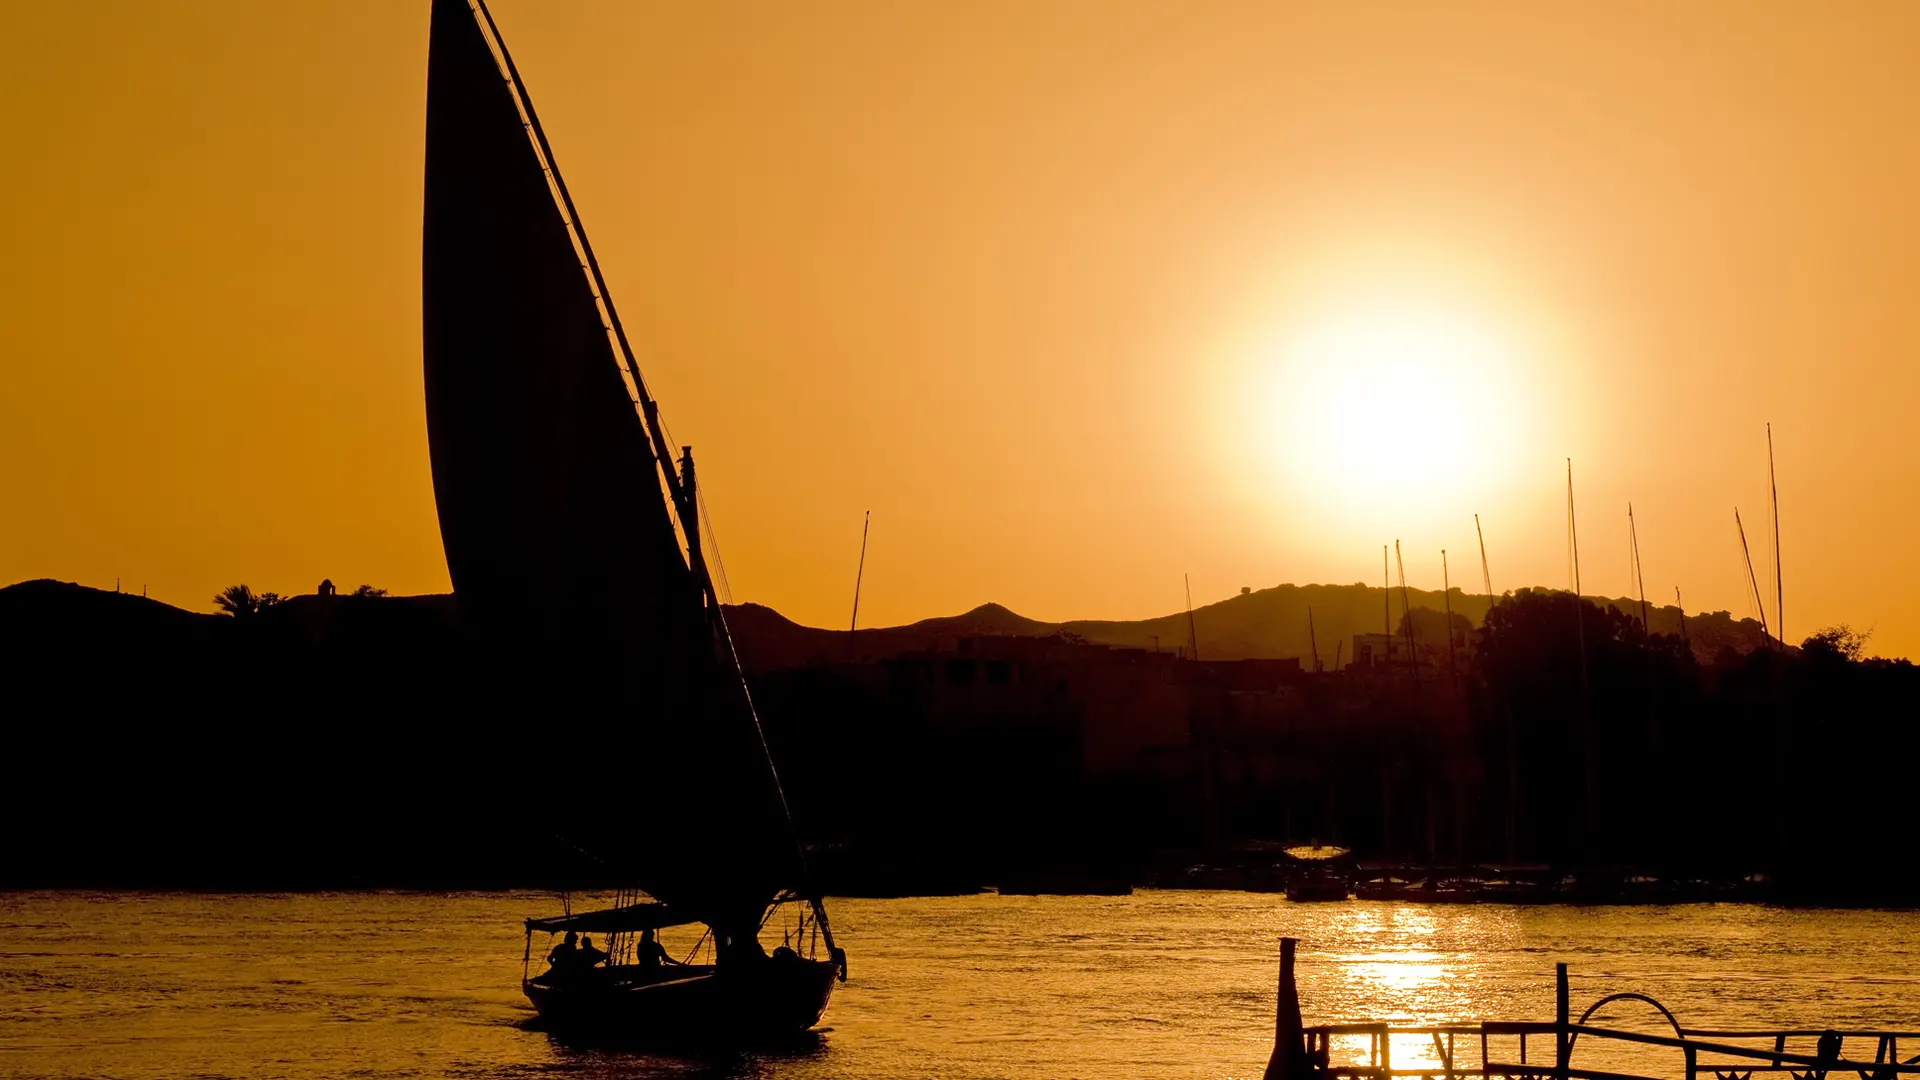 Sunset on the Nile at Aswan